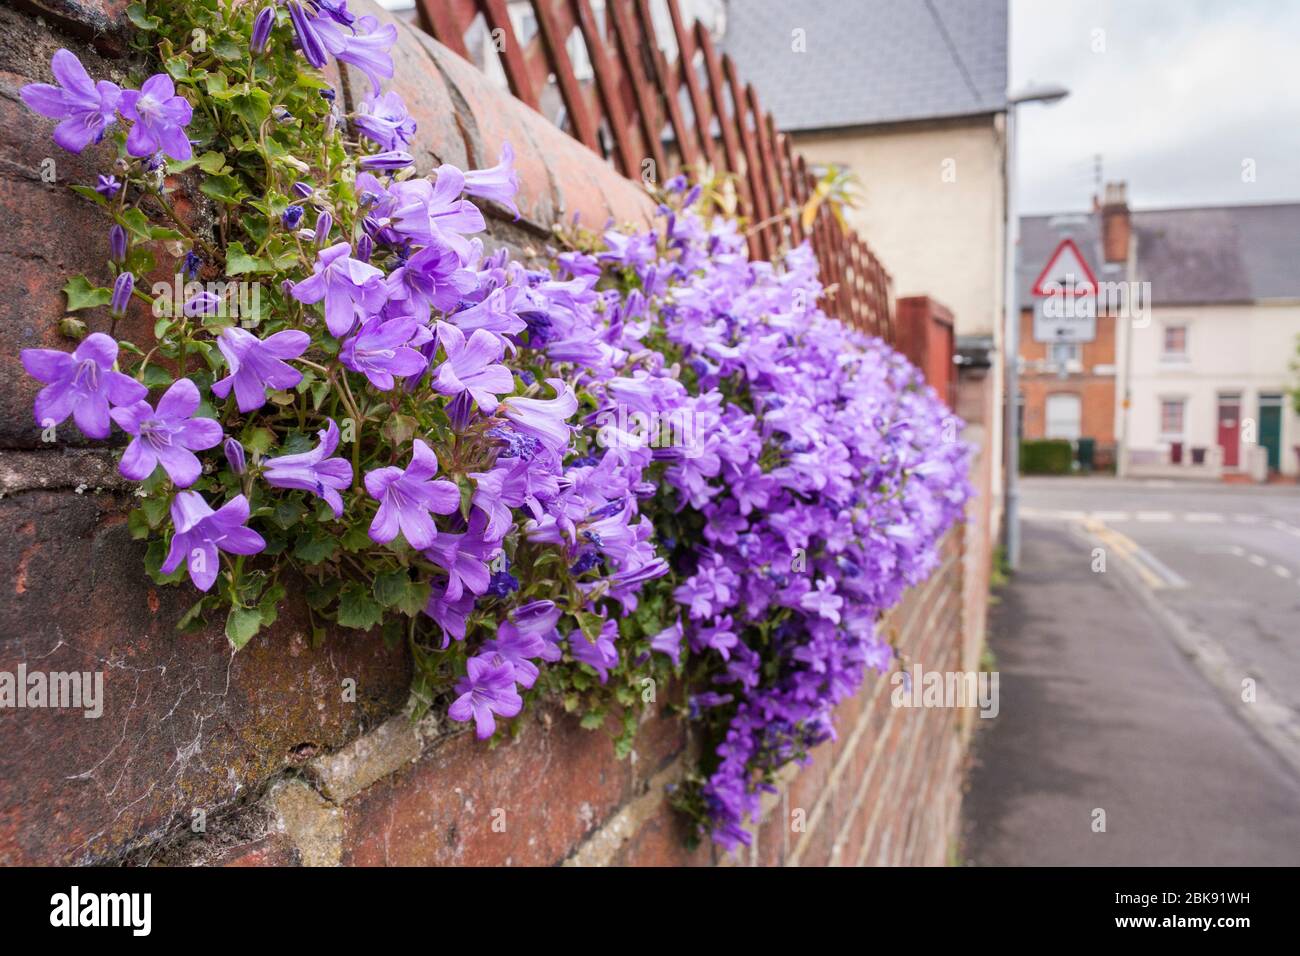 Campanula portenschlagiana, Dalmatian bellflower growing in a brick wall in a town centre. England, GB, UK Stock Photo